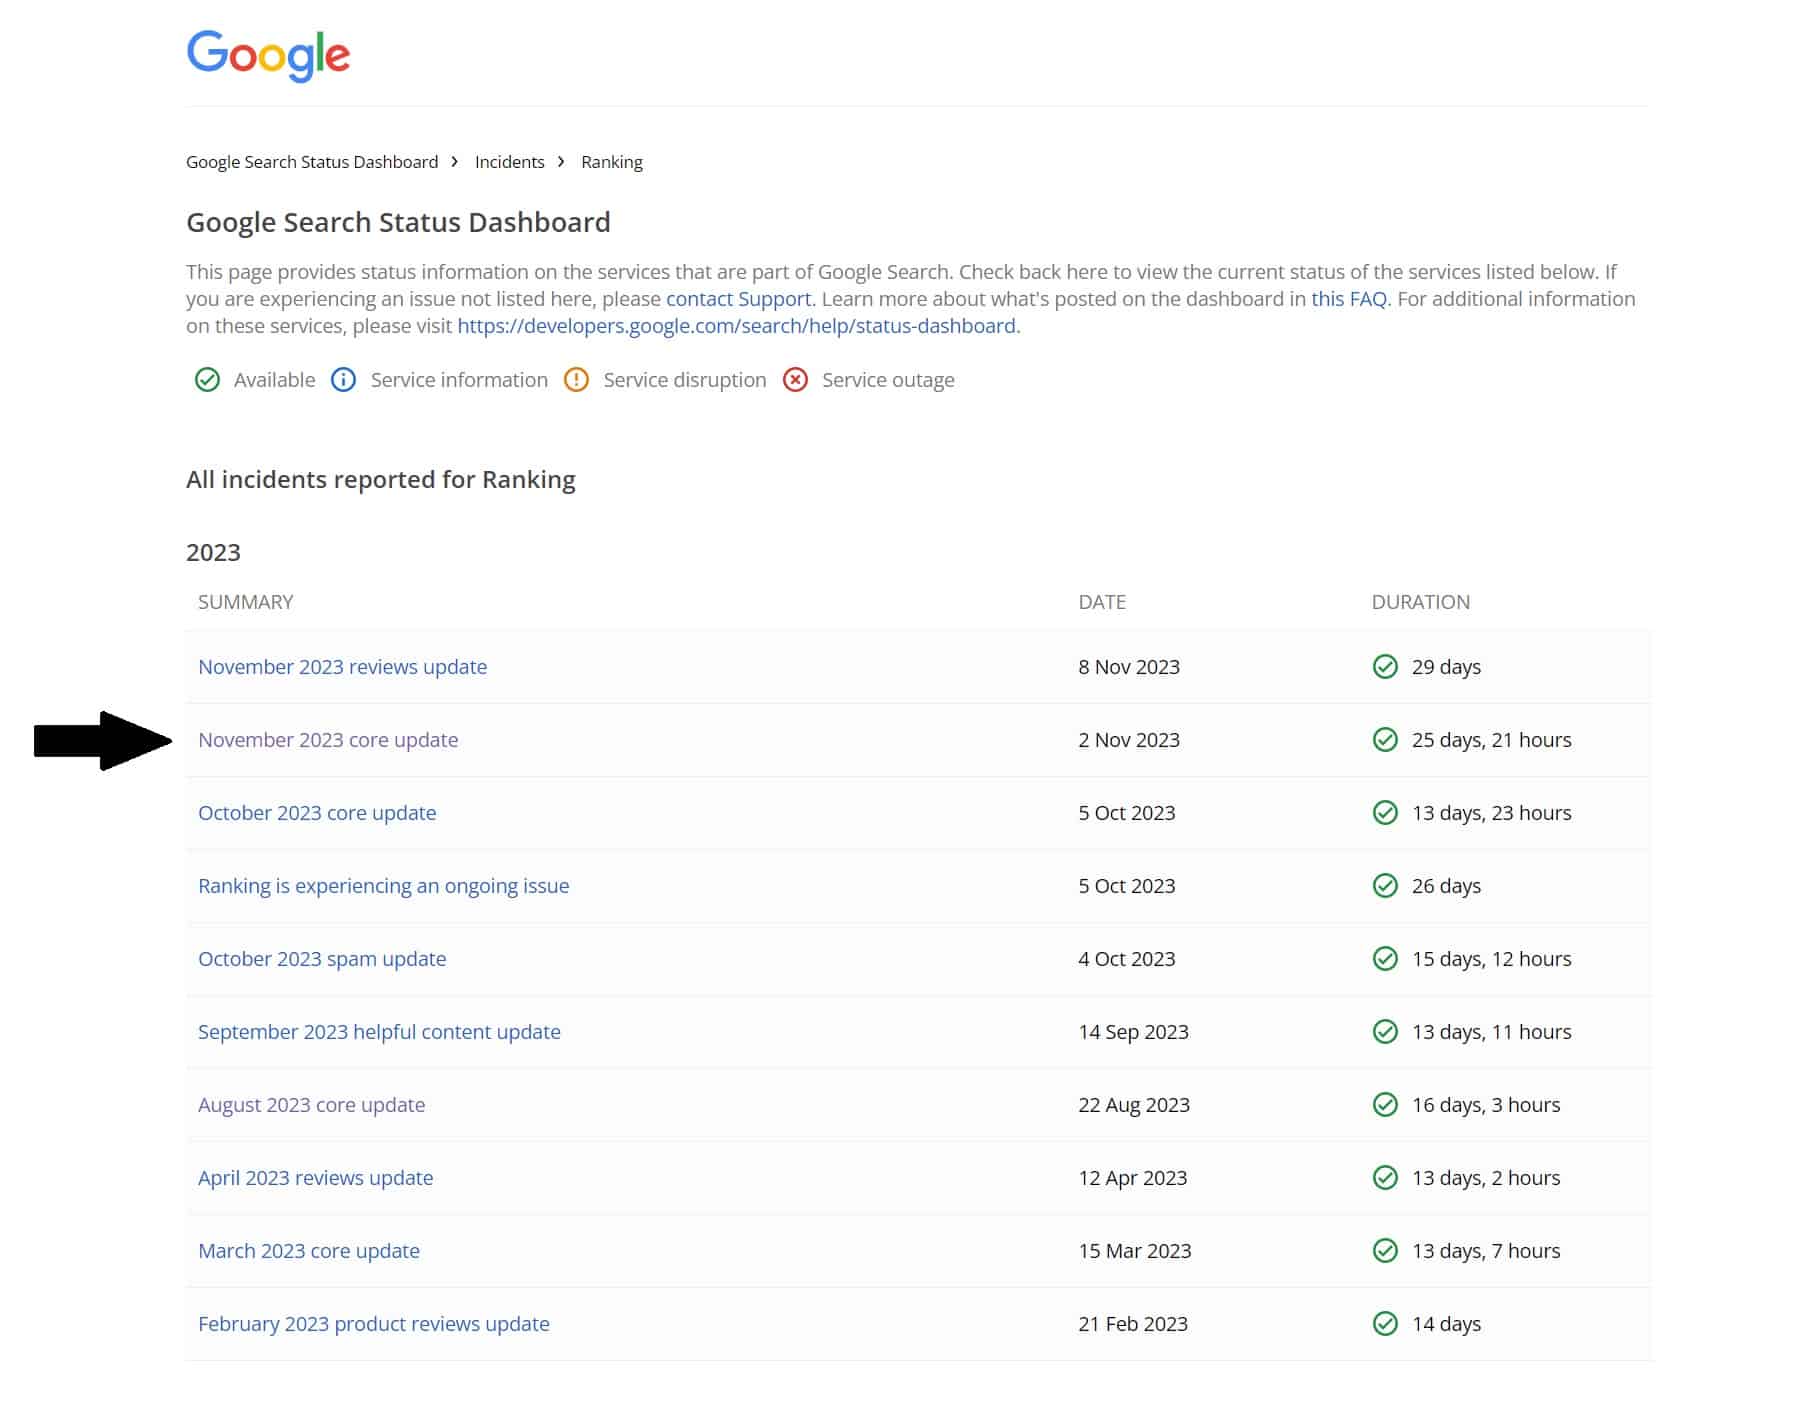 Google Search Status Dashboard with a list of Google algorithm updates by year.